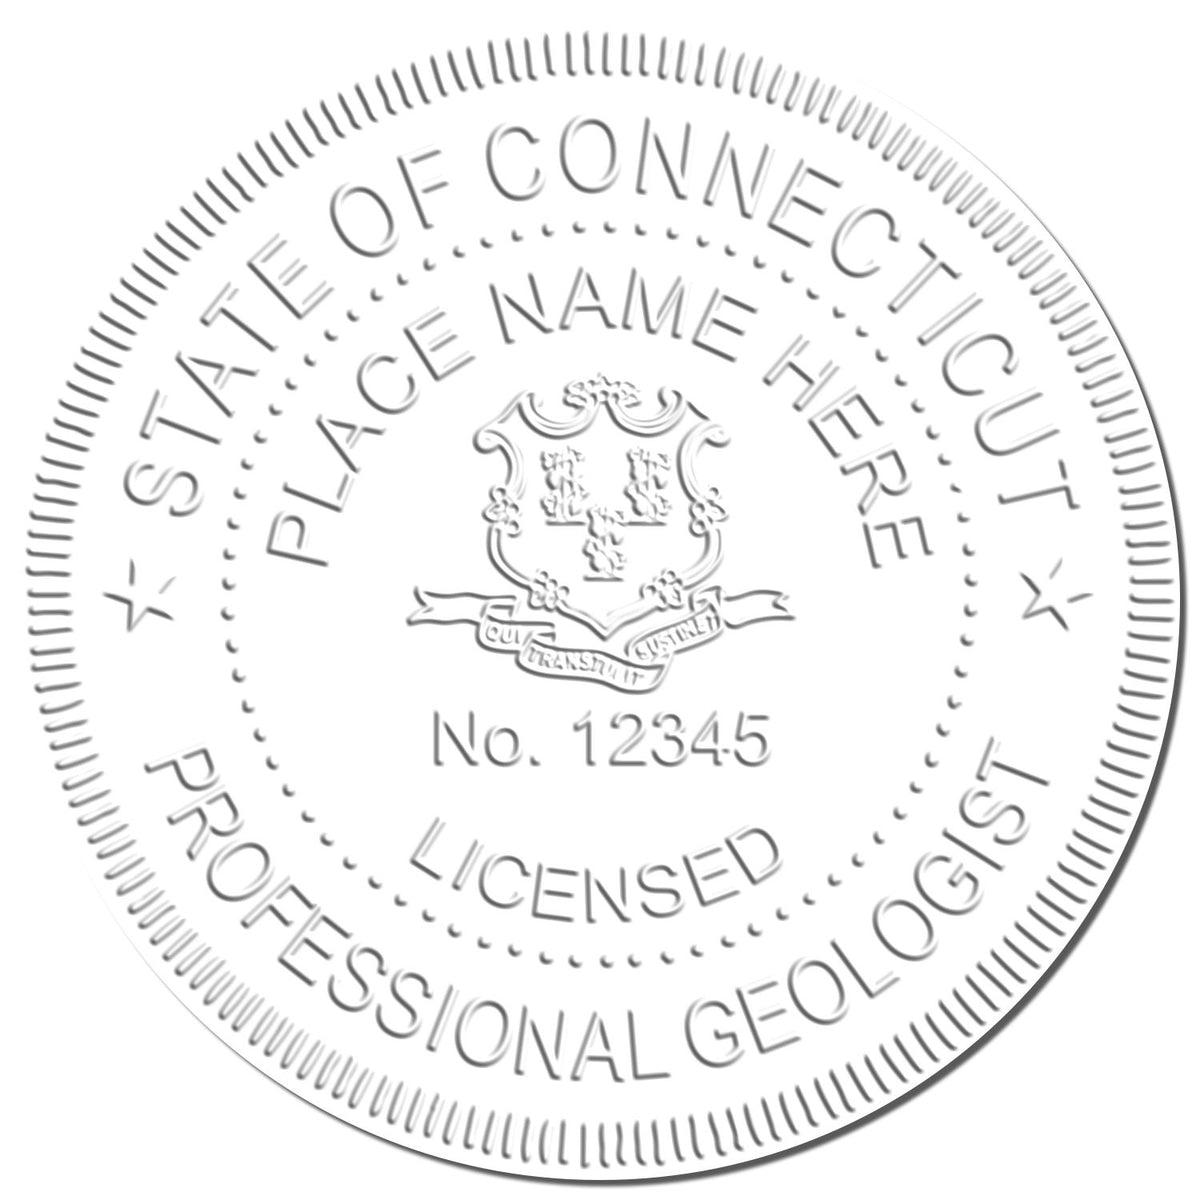 A photograph of the State of Connecticut Extended Long Reach Geologist Seal stamp impression reveals a vivid, professional image of the on paper.